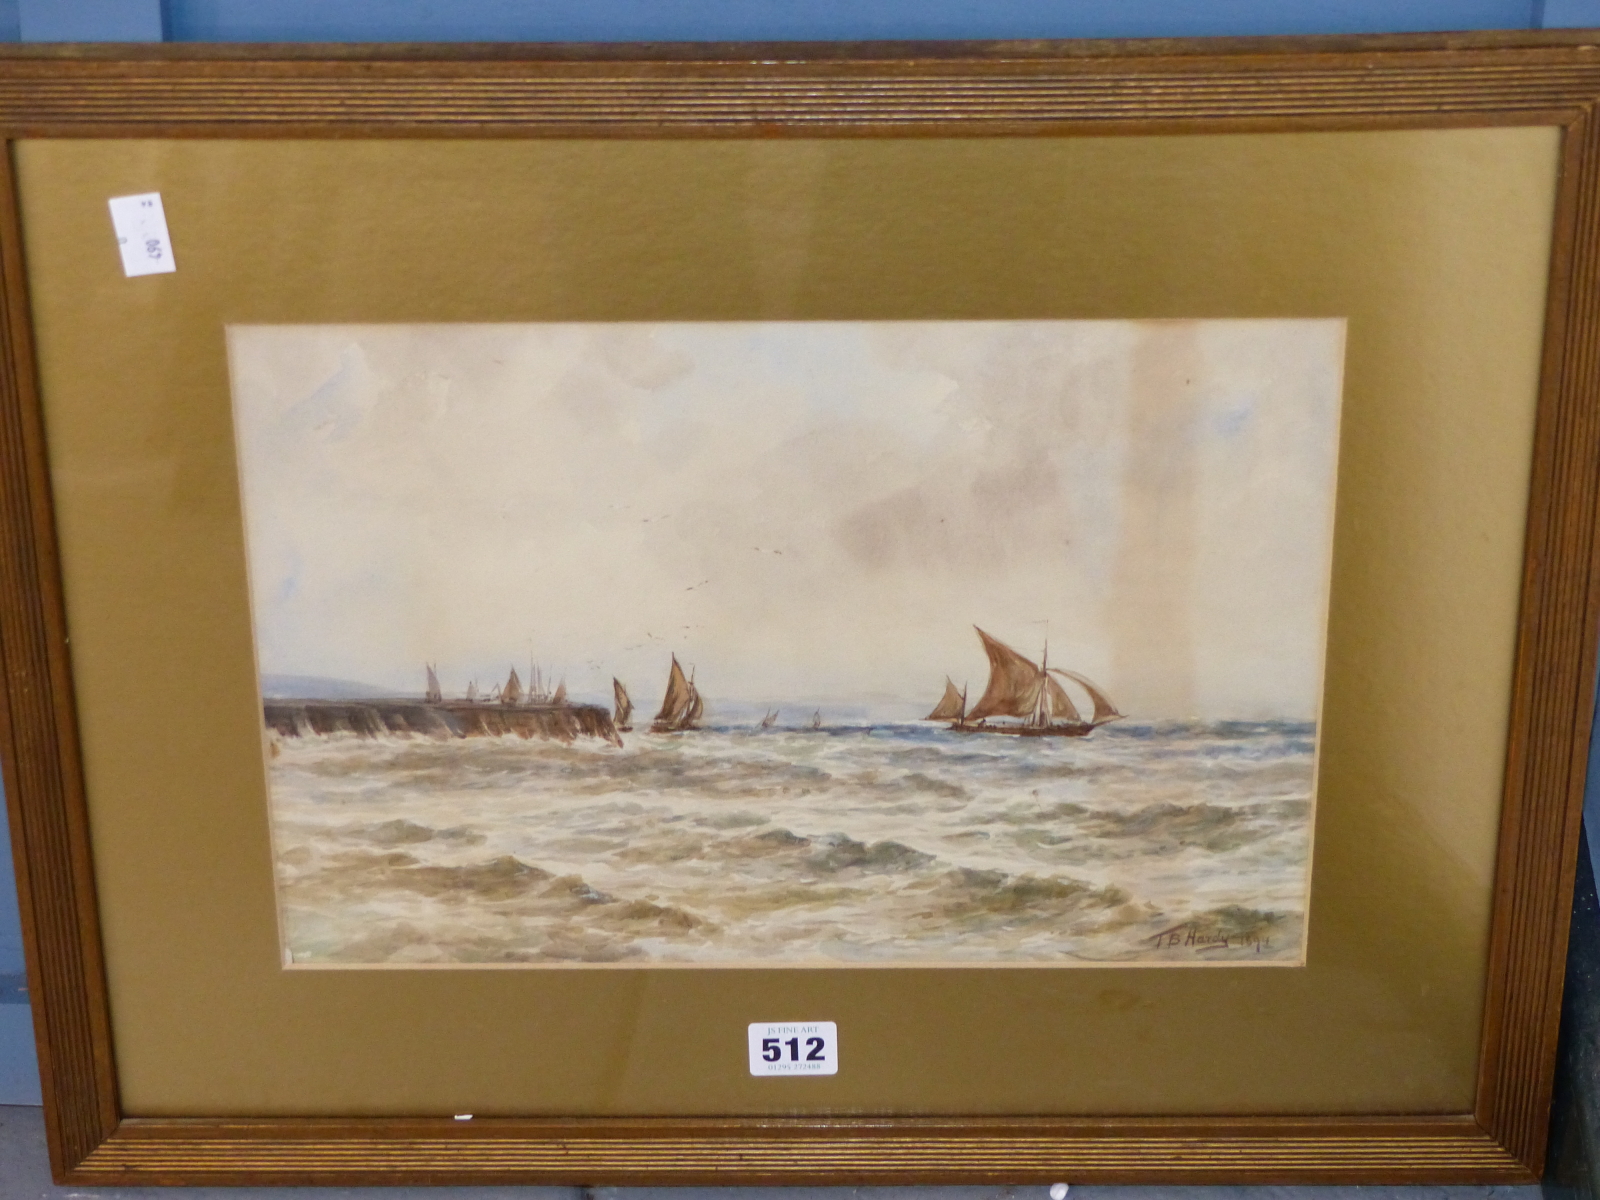 MANNER OF THOMAS BUSH HARDY (1842-1897), SAILING SHIPS IN CHOPPY SEAS, BEARS SIGNATURE AND DATE 1894 - Image 3 of 5